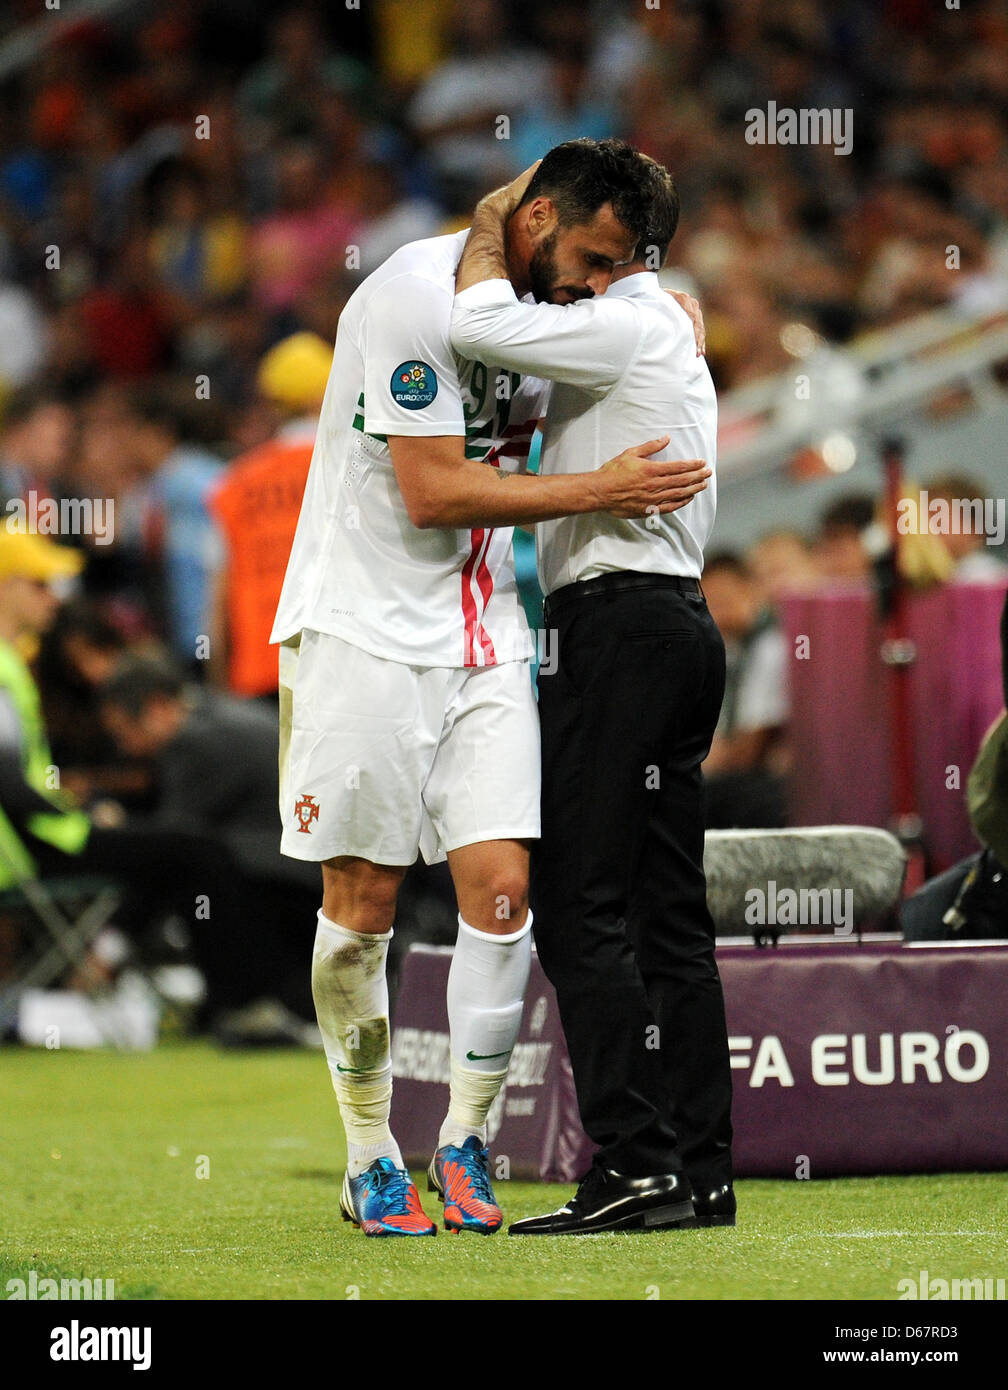 Portugal's Hugo Almeida (L) embraces his  coach Paulo Bento during UEFA EURO 2012 semi-final soccer match Portugal vs Spain at Donbass Arena in Donetsk, Ukraine, 27 June 2012. Photo: Thomas Eisenhuth dpa (Please refer to chapters 7 and 8 of http://dpaq.de/Ziovh for UEFA Euro 2012 Terms & Conditions) Stock Photo